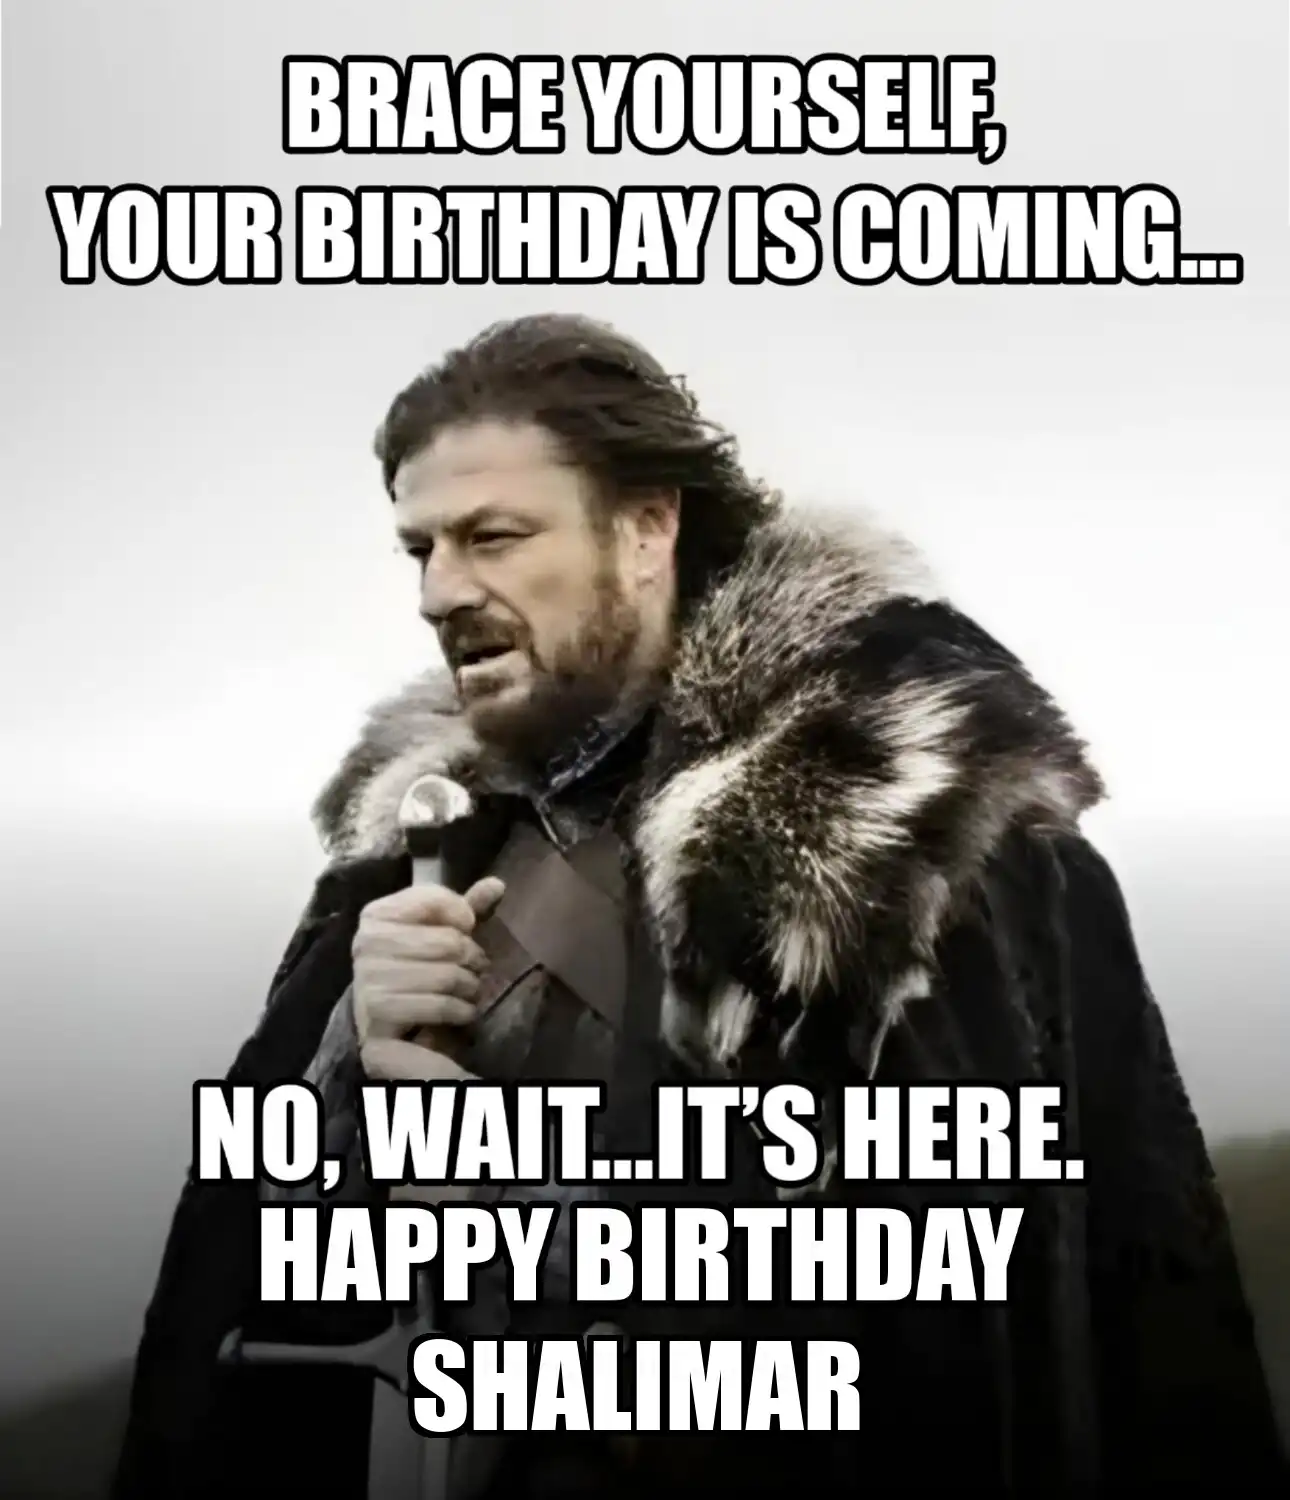 Happy Birthday Shalimar Brace Yourself Your Birthday Is Coming Meme